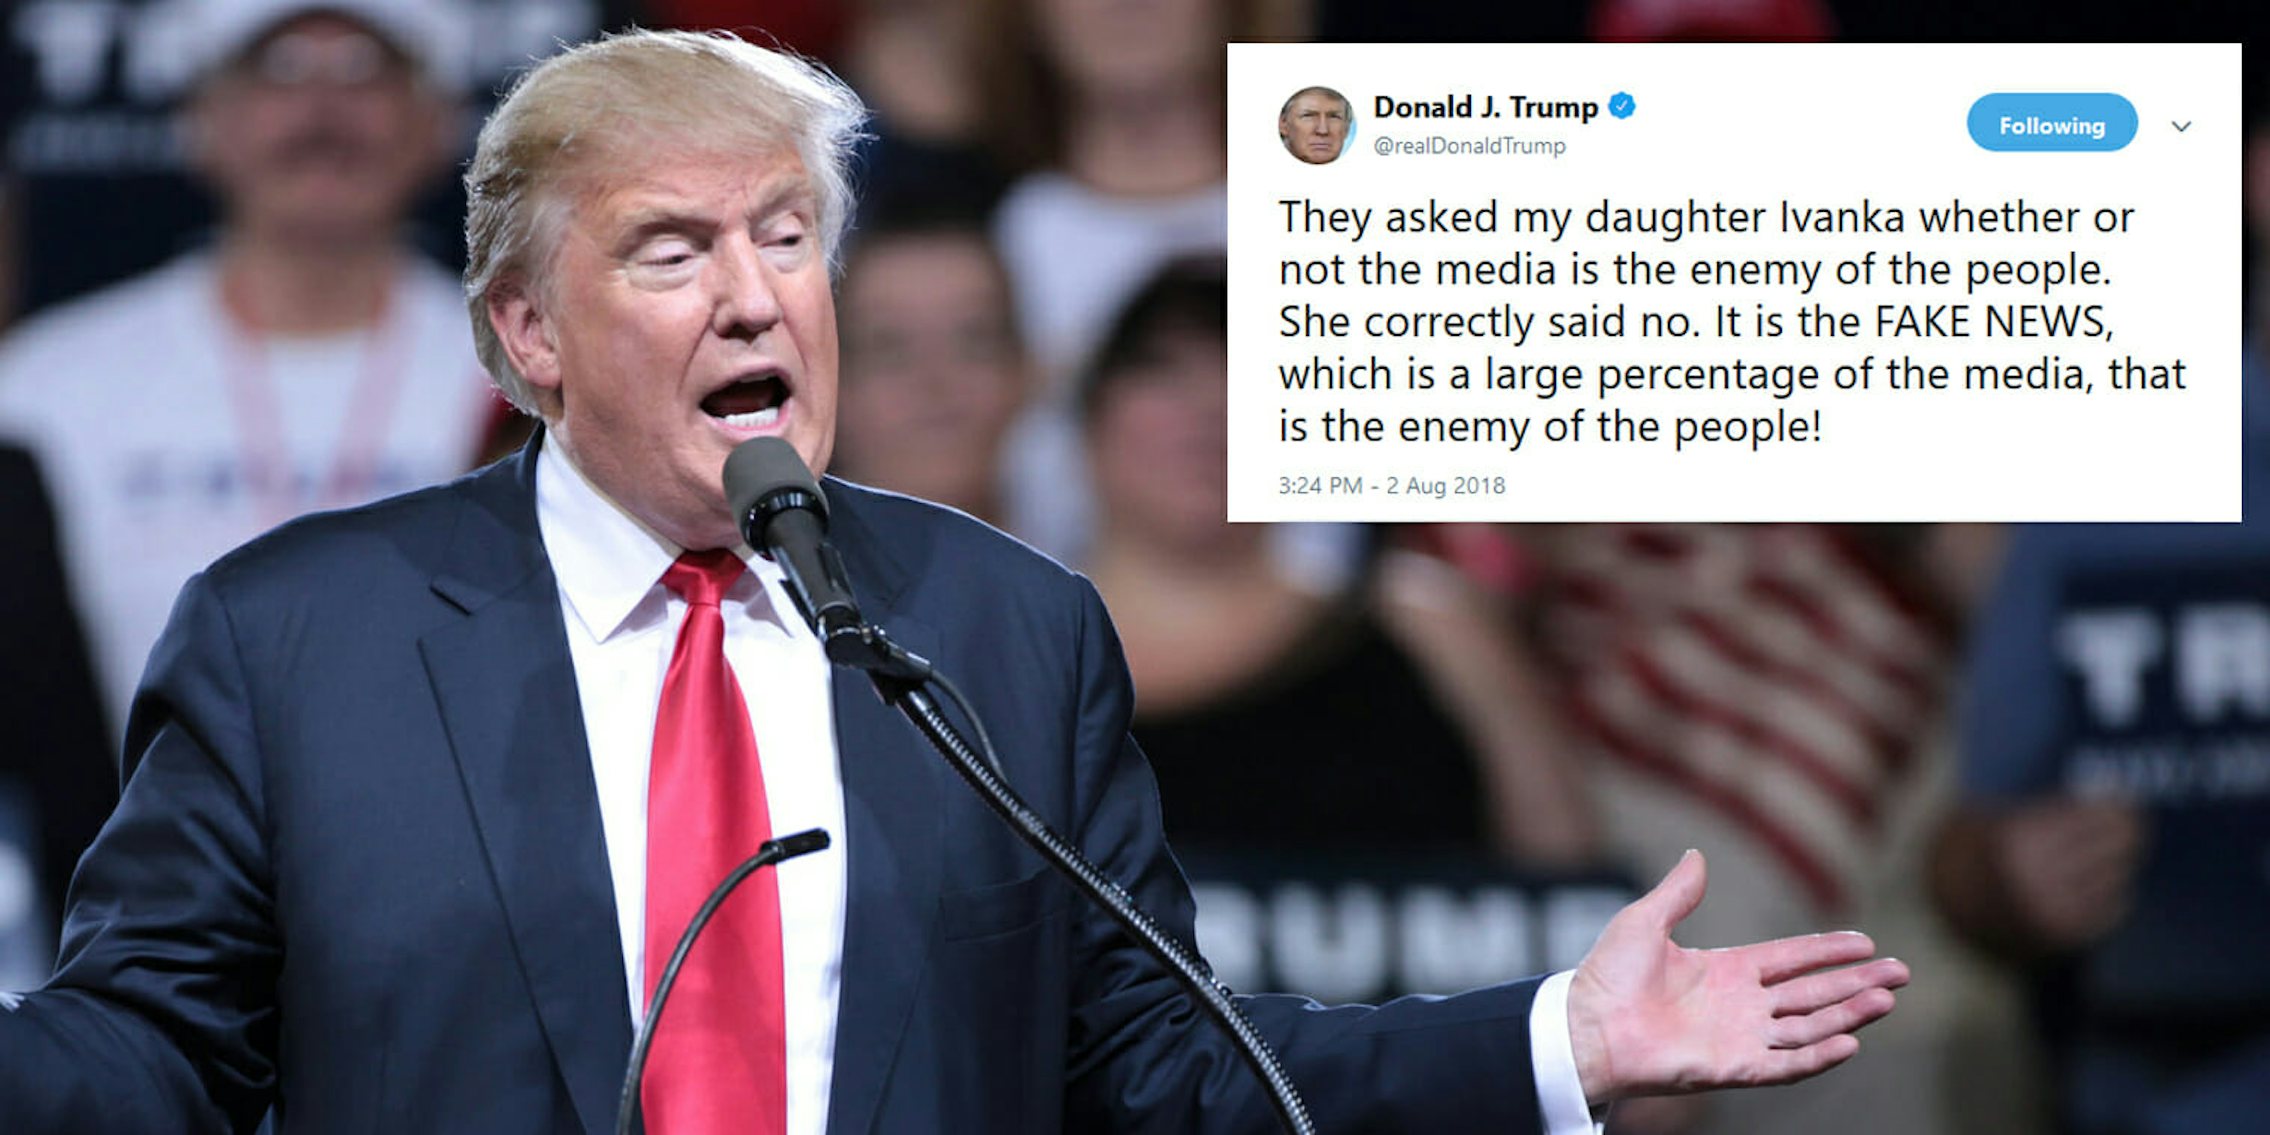 President Donald Trump tried to clarify remarks Ivanka Trump gave where she said she disagreed with her father that the media was the 'enemy of the people.'